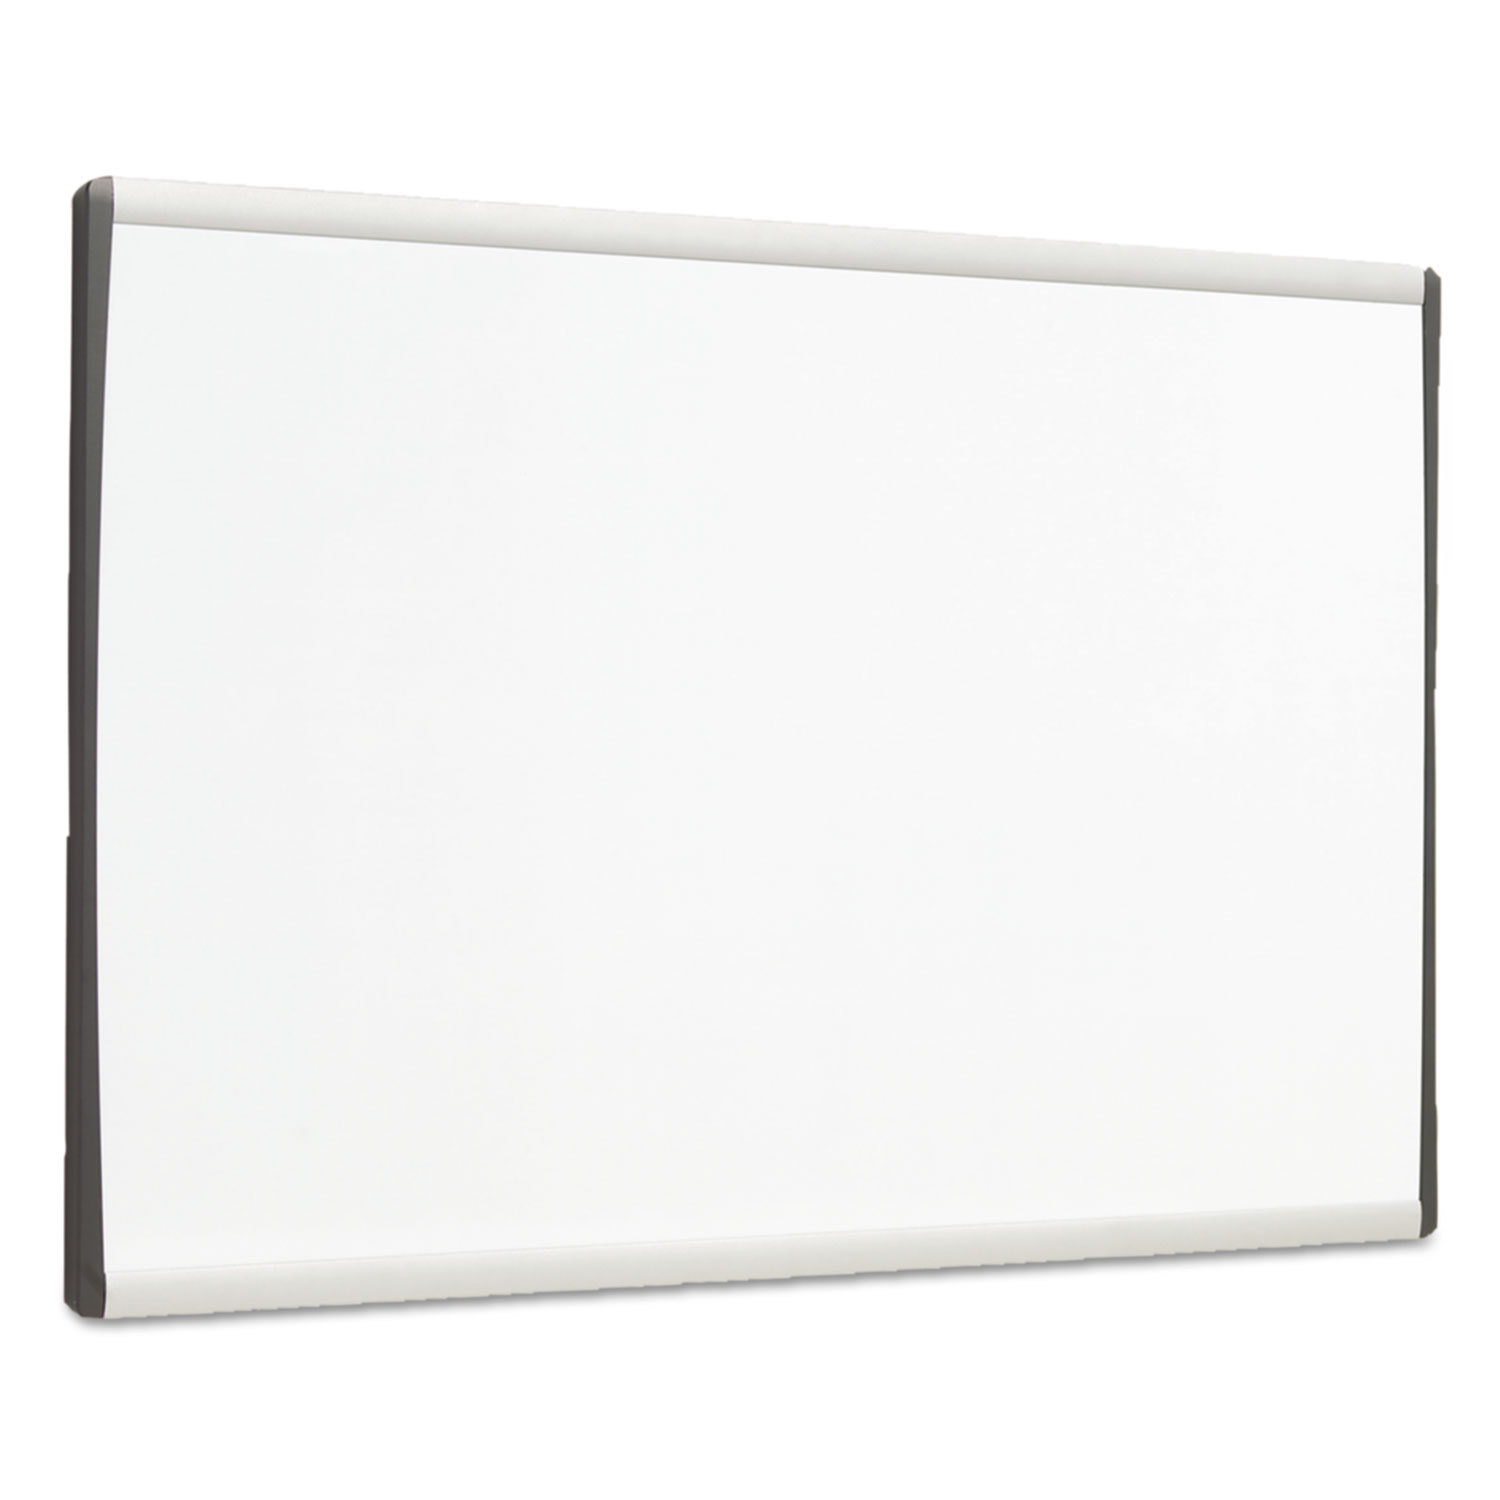 Magnetic Dry-Erase Board, Steel, 11 x 14, White Surface, Silver Aluminum Frame